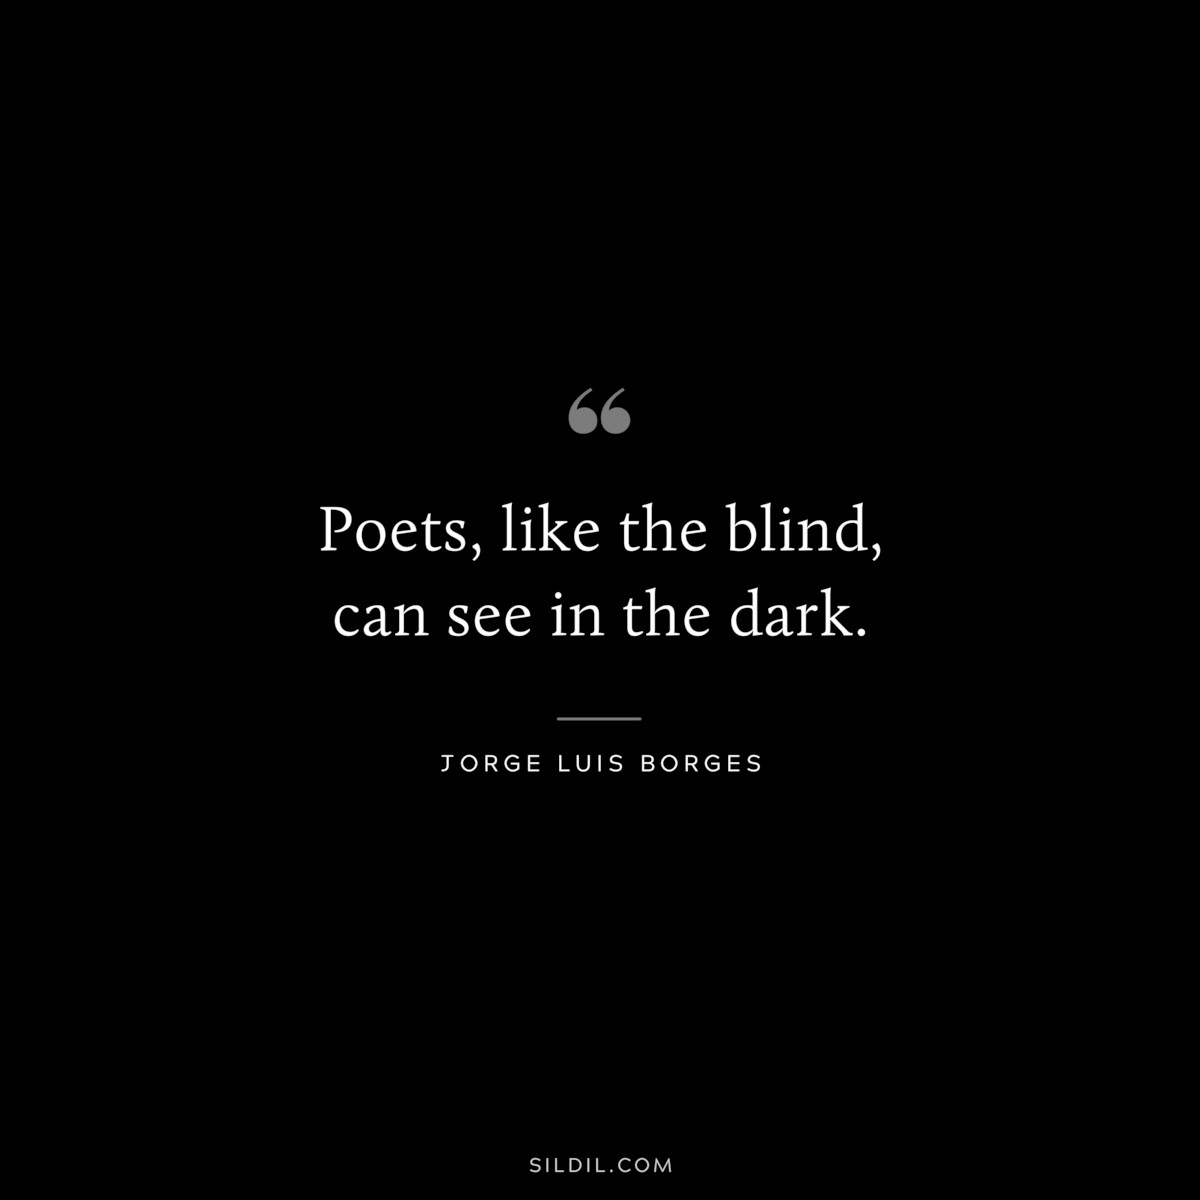 Poets, like the blind, can see in the dark. ― Jorge Luis Borges